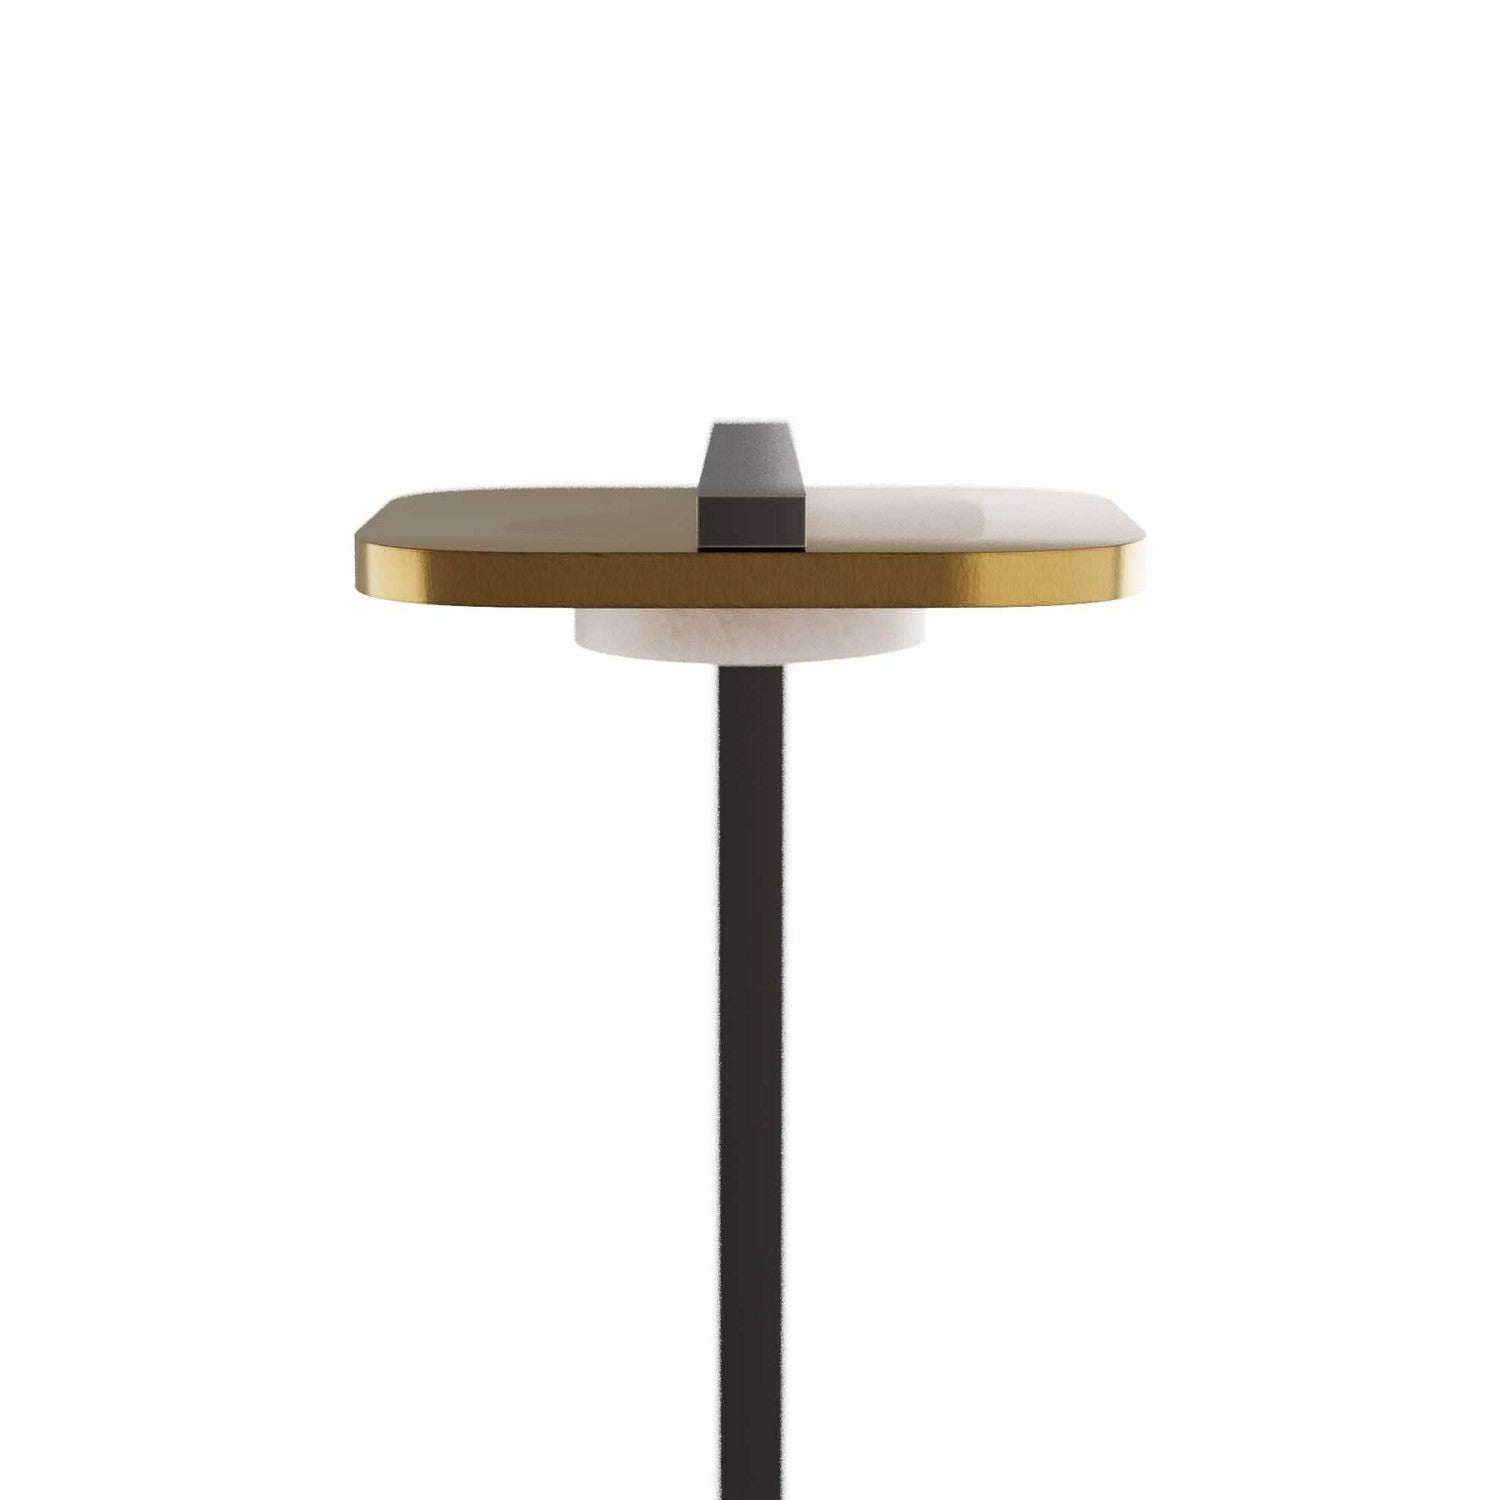 LED Floor Lamp from the Trebeck collection in Antique Brass finish